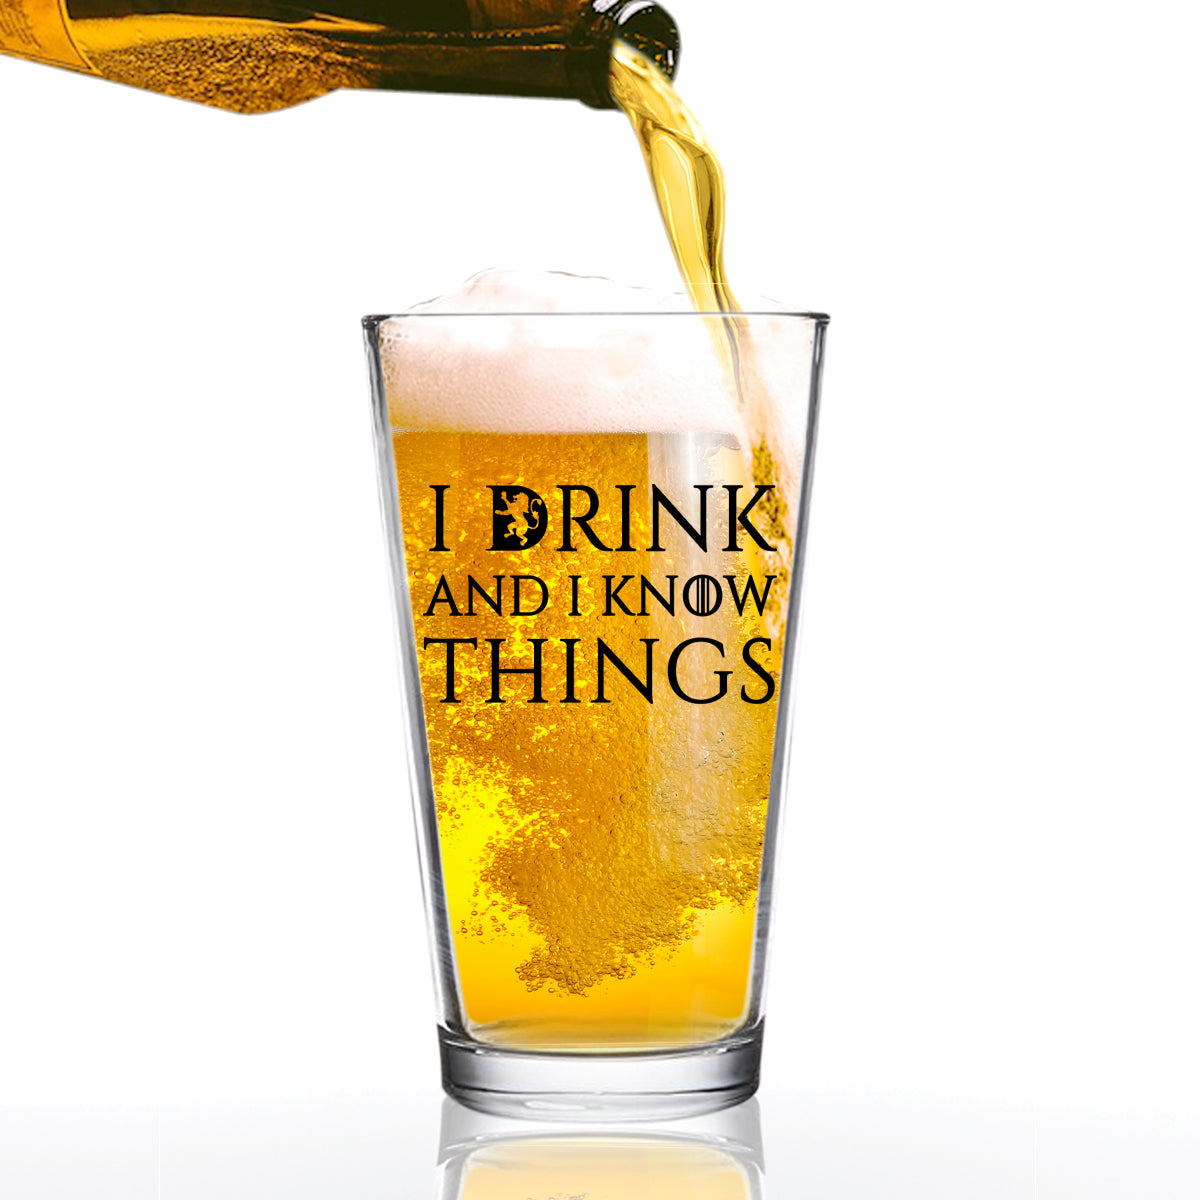 I Drink and I Know Things Beer Glass 16 oz Funny